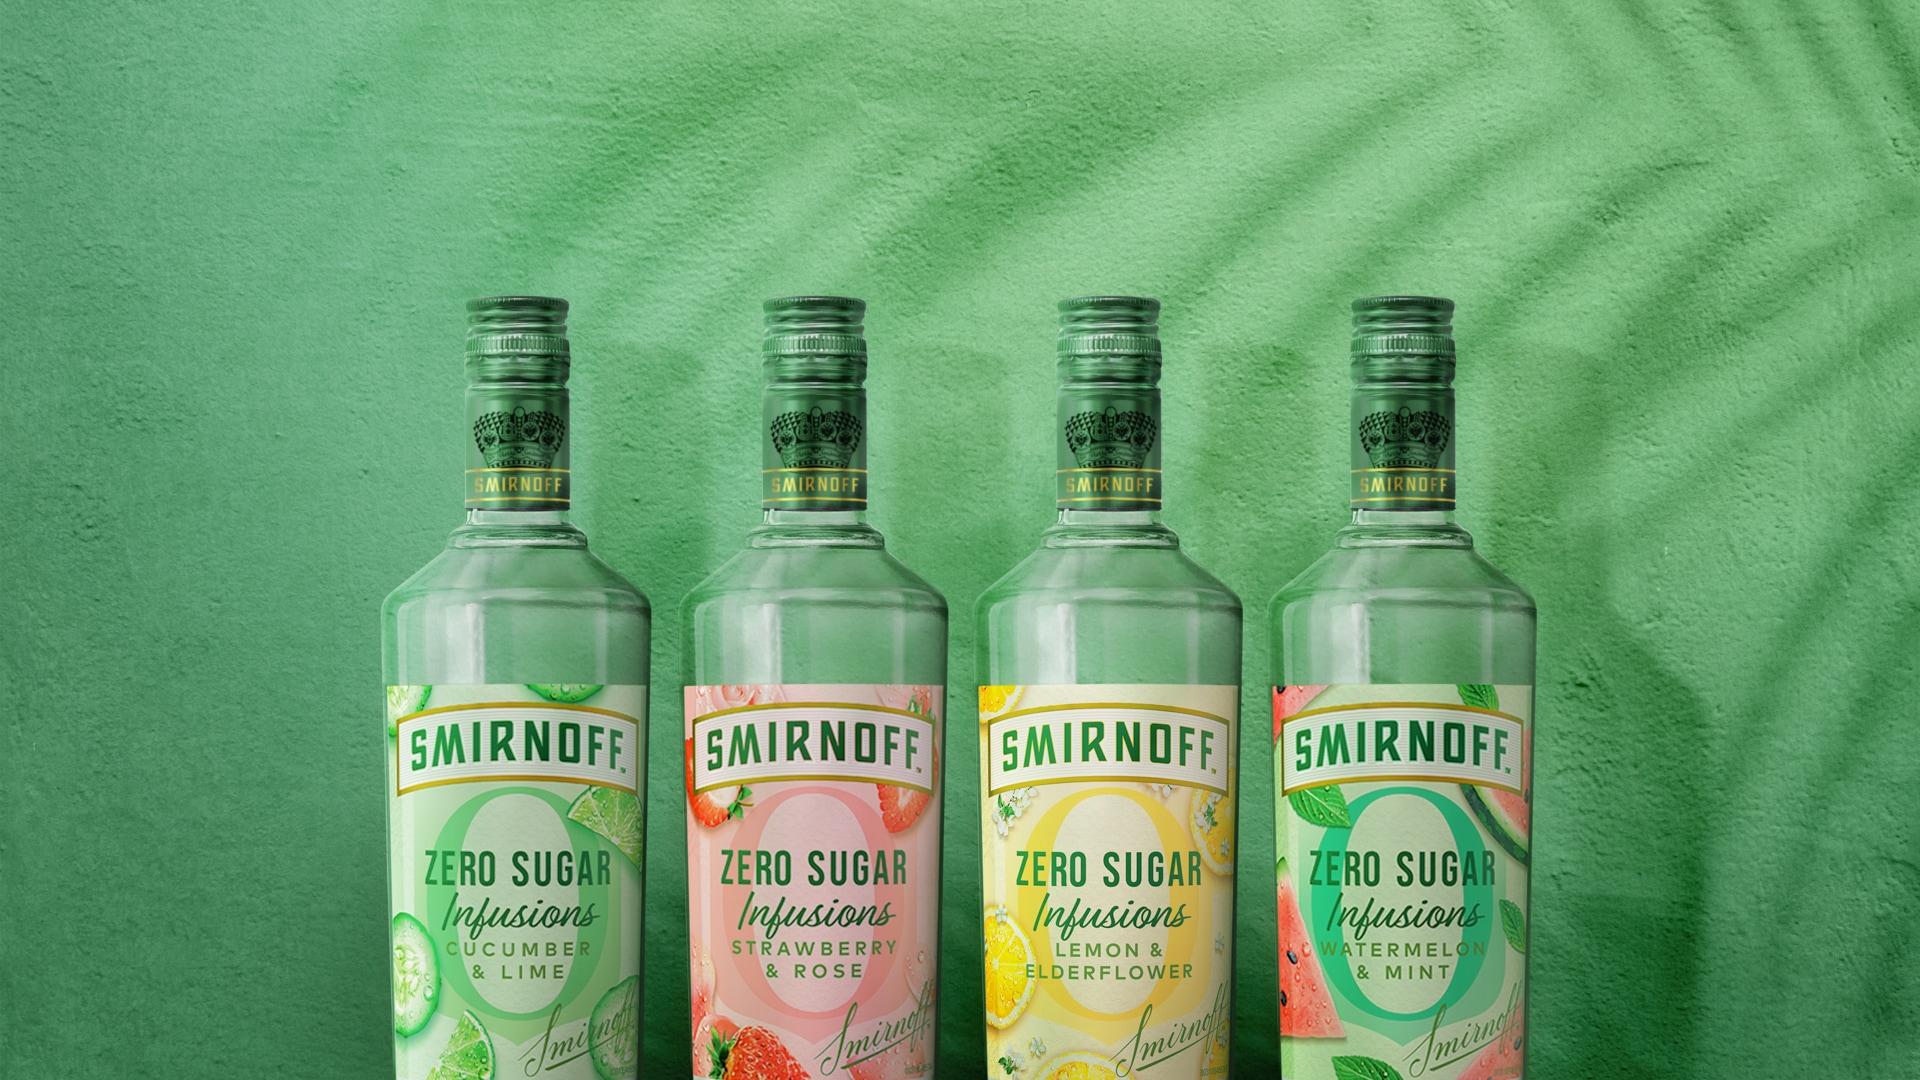 Smirnoff Zero Sugar Infusions Cucumber and Lime X Smirnoff Zero Sugar Infusions Strawberry and Rose X Smirnoff Zero Sugar Infusions Lemon and Elderflower X Smirnoff Zero Sugar Infusions Watermelon and Mint on a green background with a palm shadow